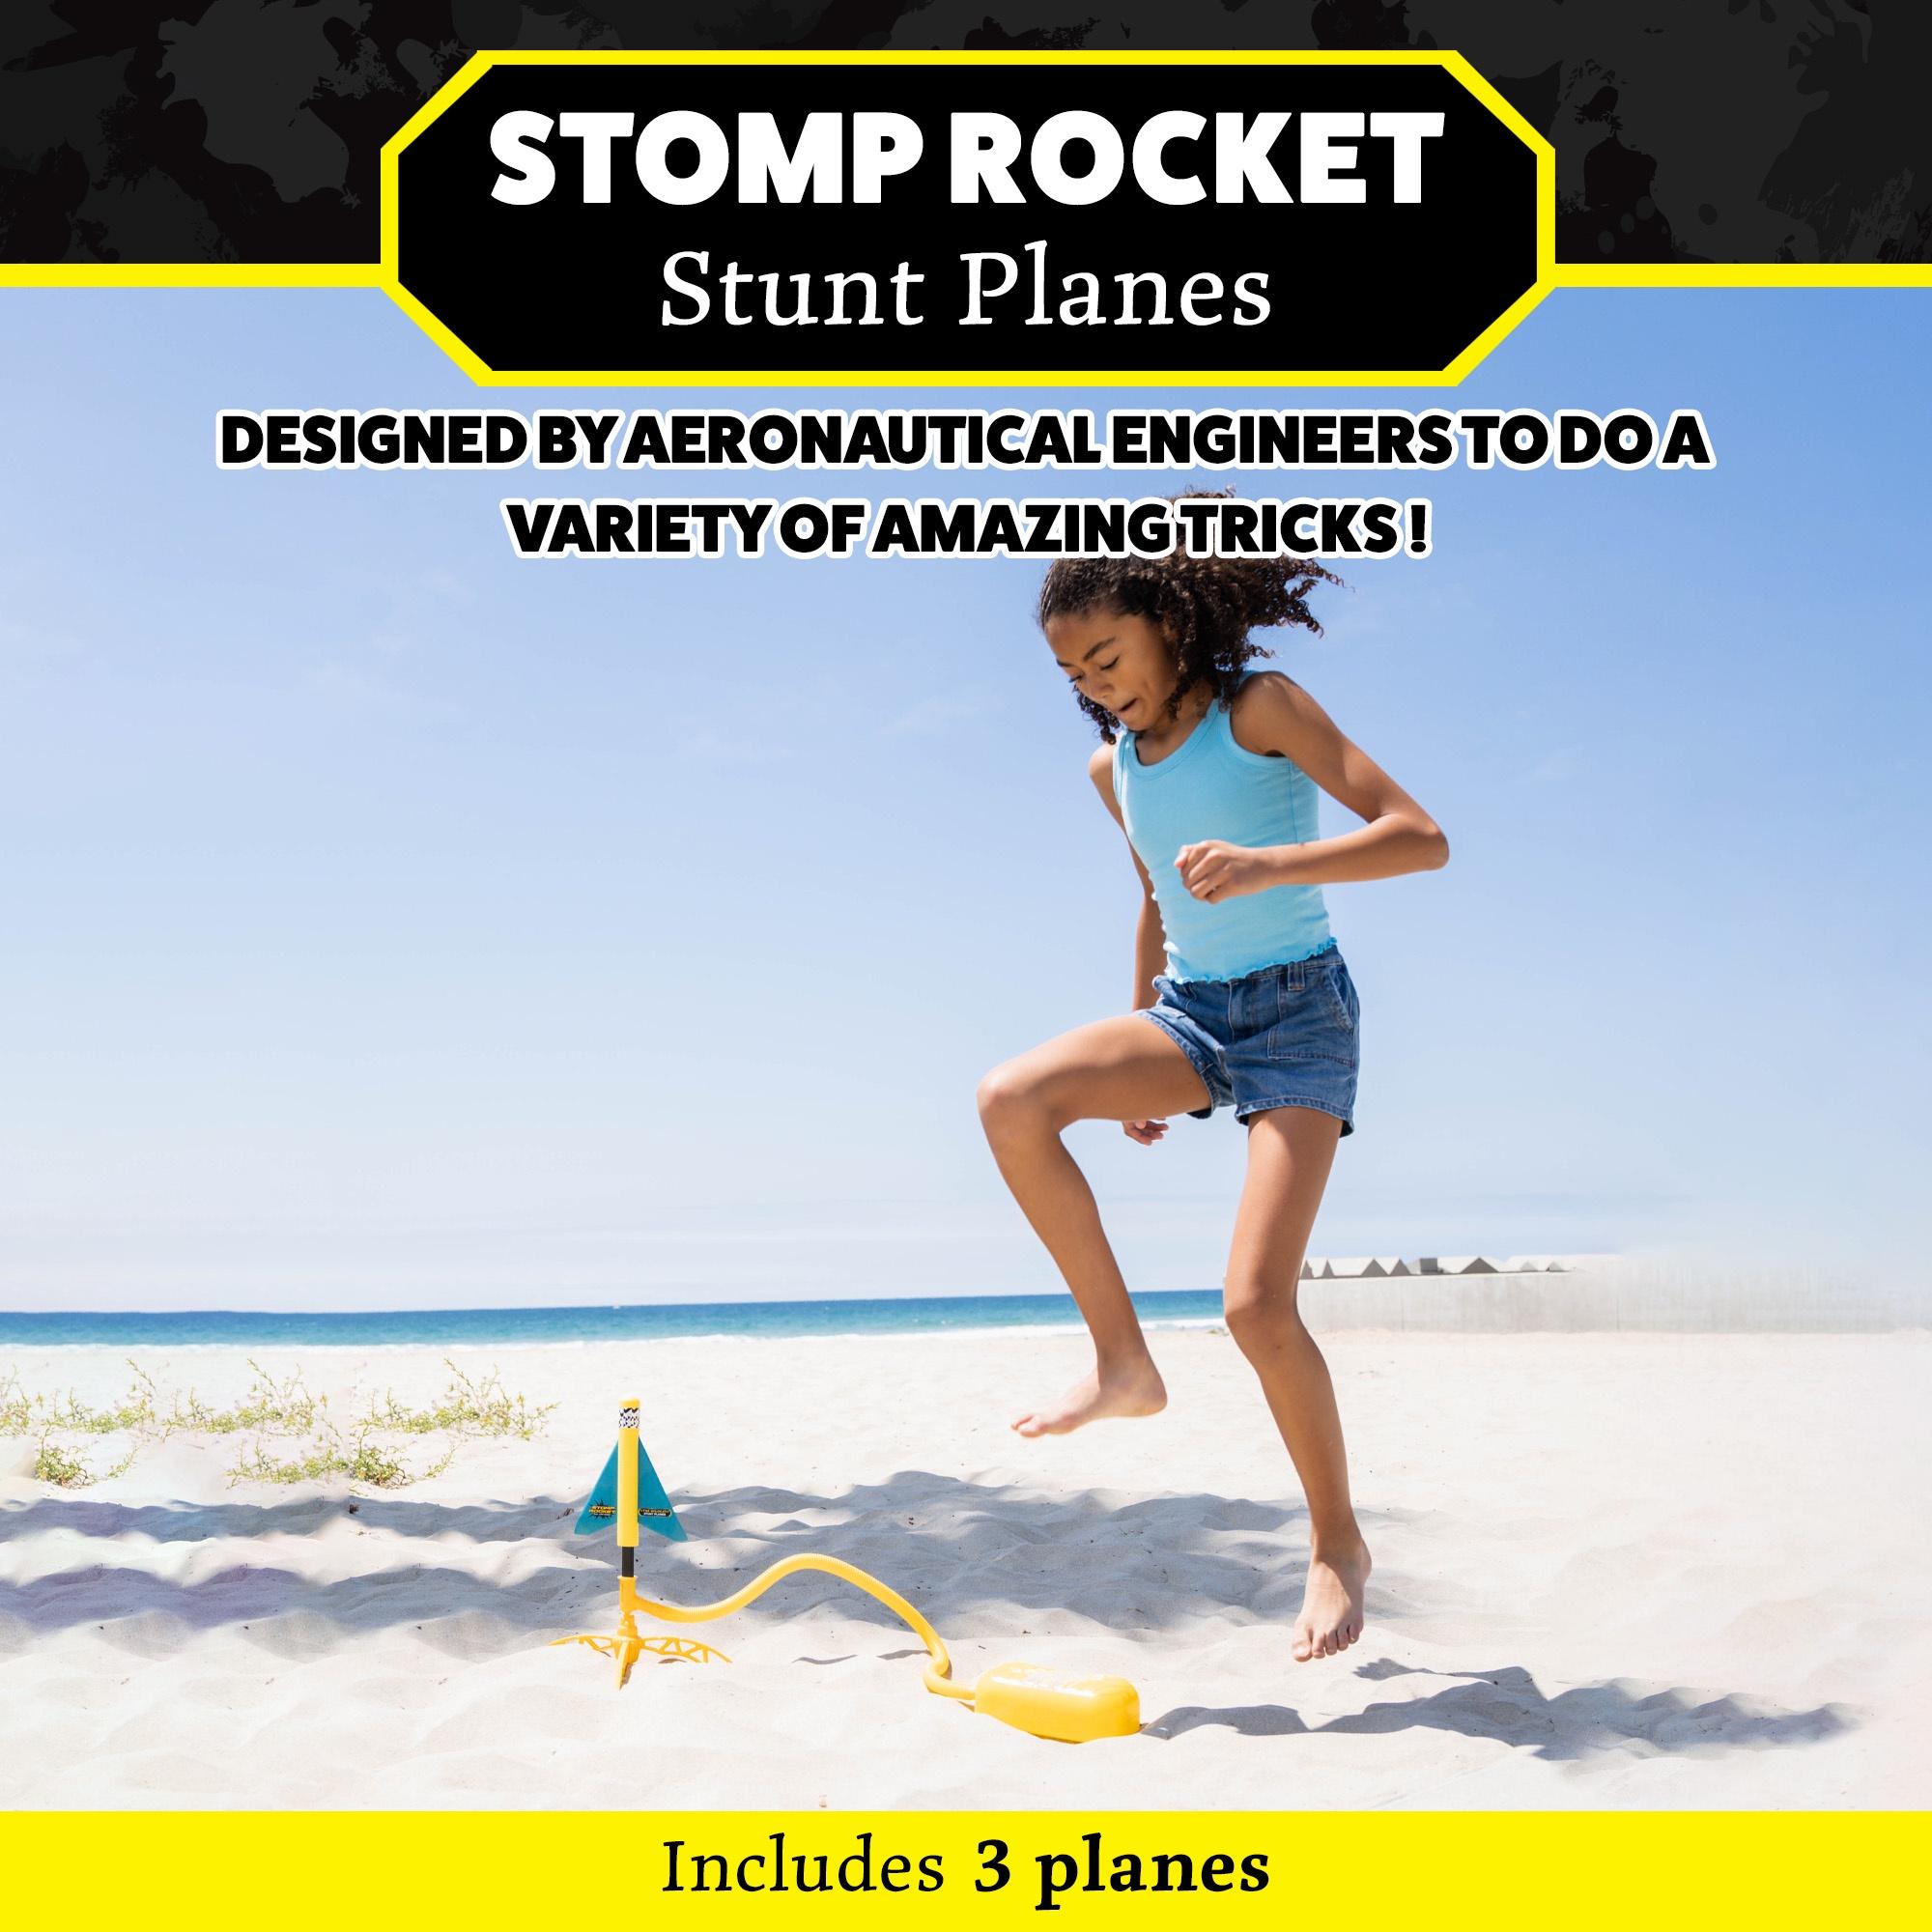 Stomp Rocket® Original Stunt Plane Launcher for Kids, Soars 100 Ft, 3 Foam Stunt Planes and Adjustable Launcher, Gift for Boys and Girls Ages 5 and up - image 3 of 7